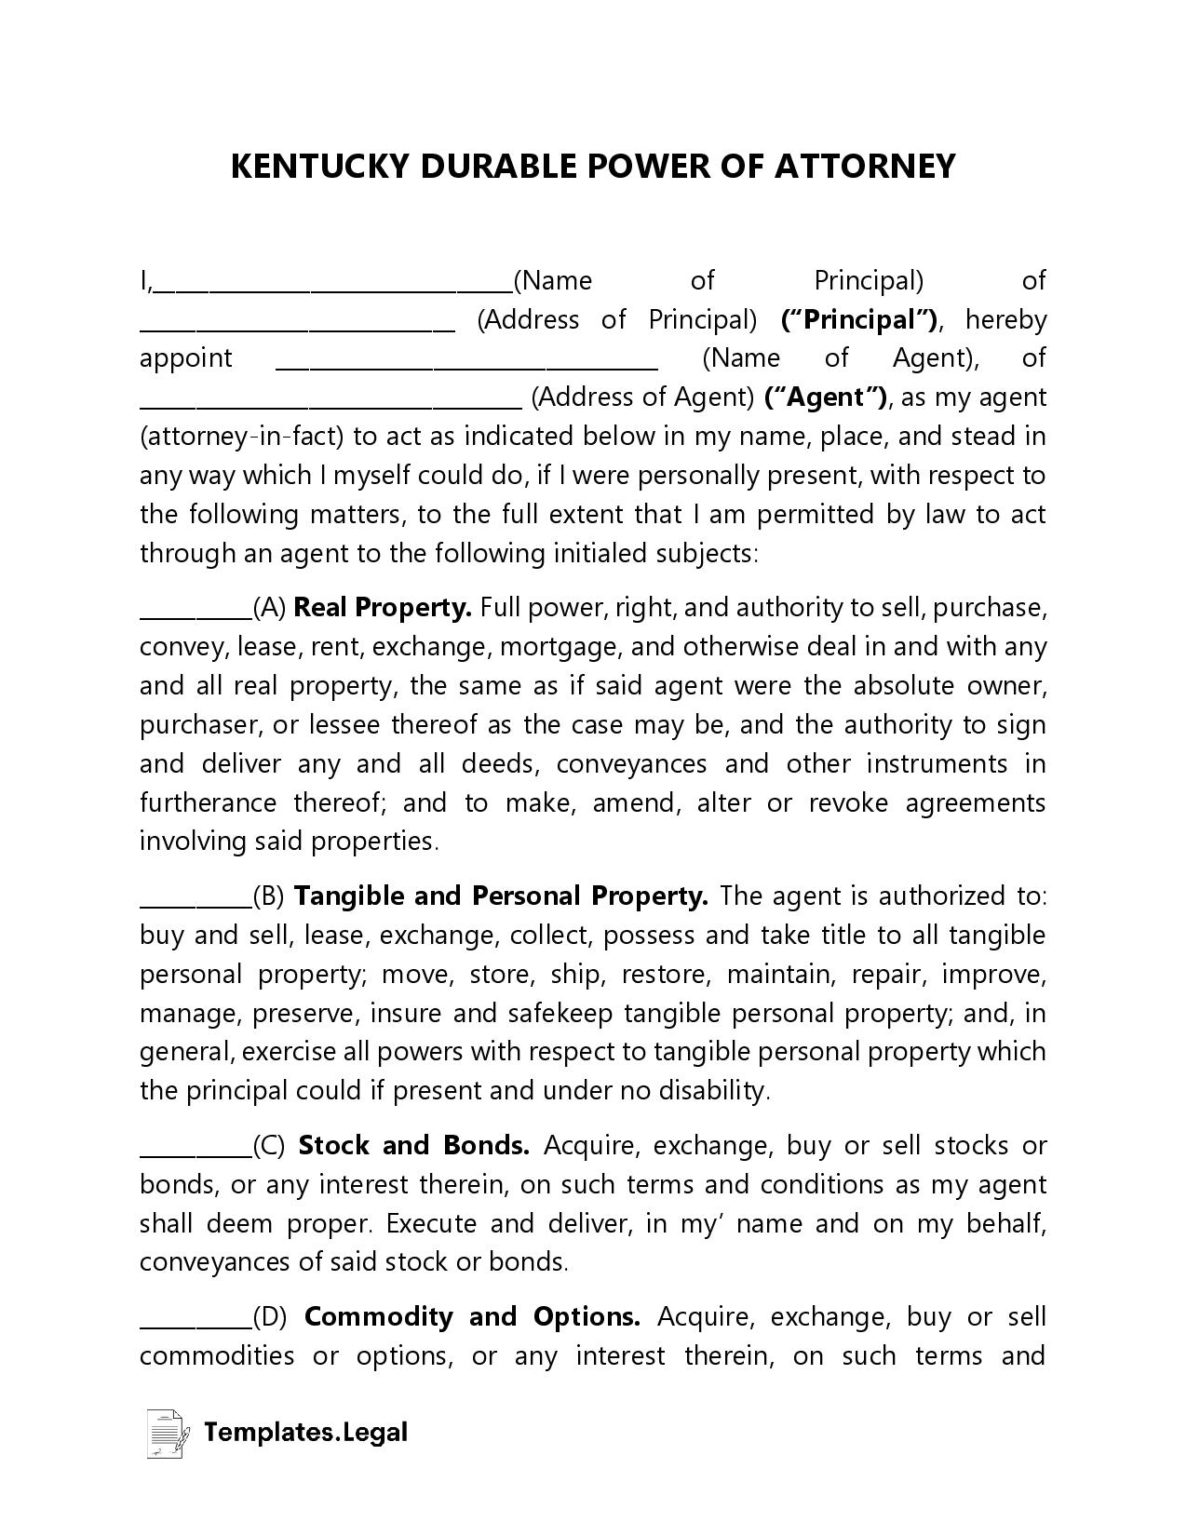 Kentucky Power of Attorney Templates (Free) Word PDF ODT